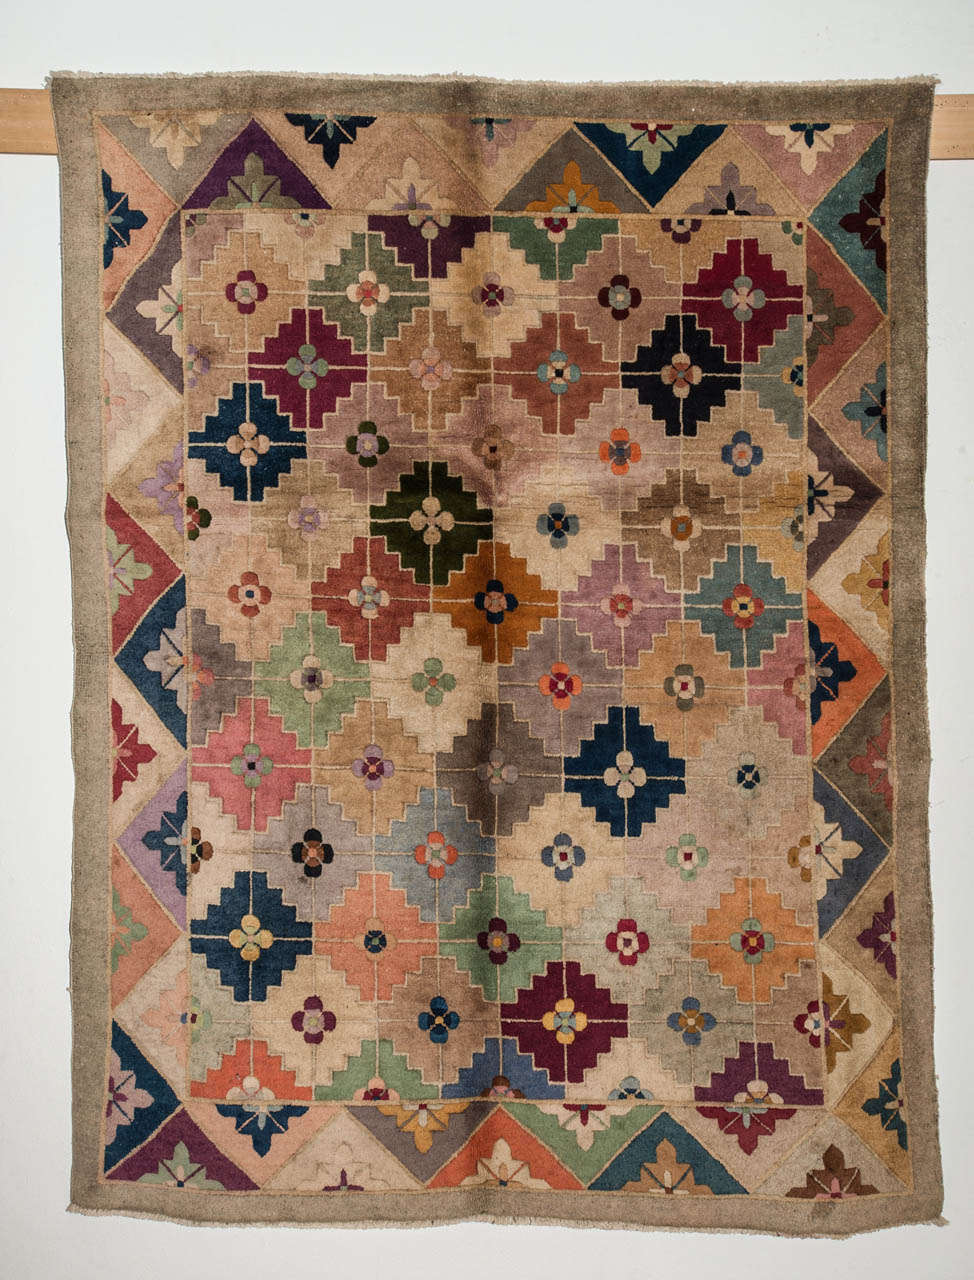 An unusual Chinese carpet decorated by an allover arrangement of polychrome tiles, a pattern which first appears on 17th century Chinese weavings of the Qing Dynasty. The palette as well as the type of weaving is characteristic of the Chinese